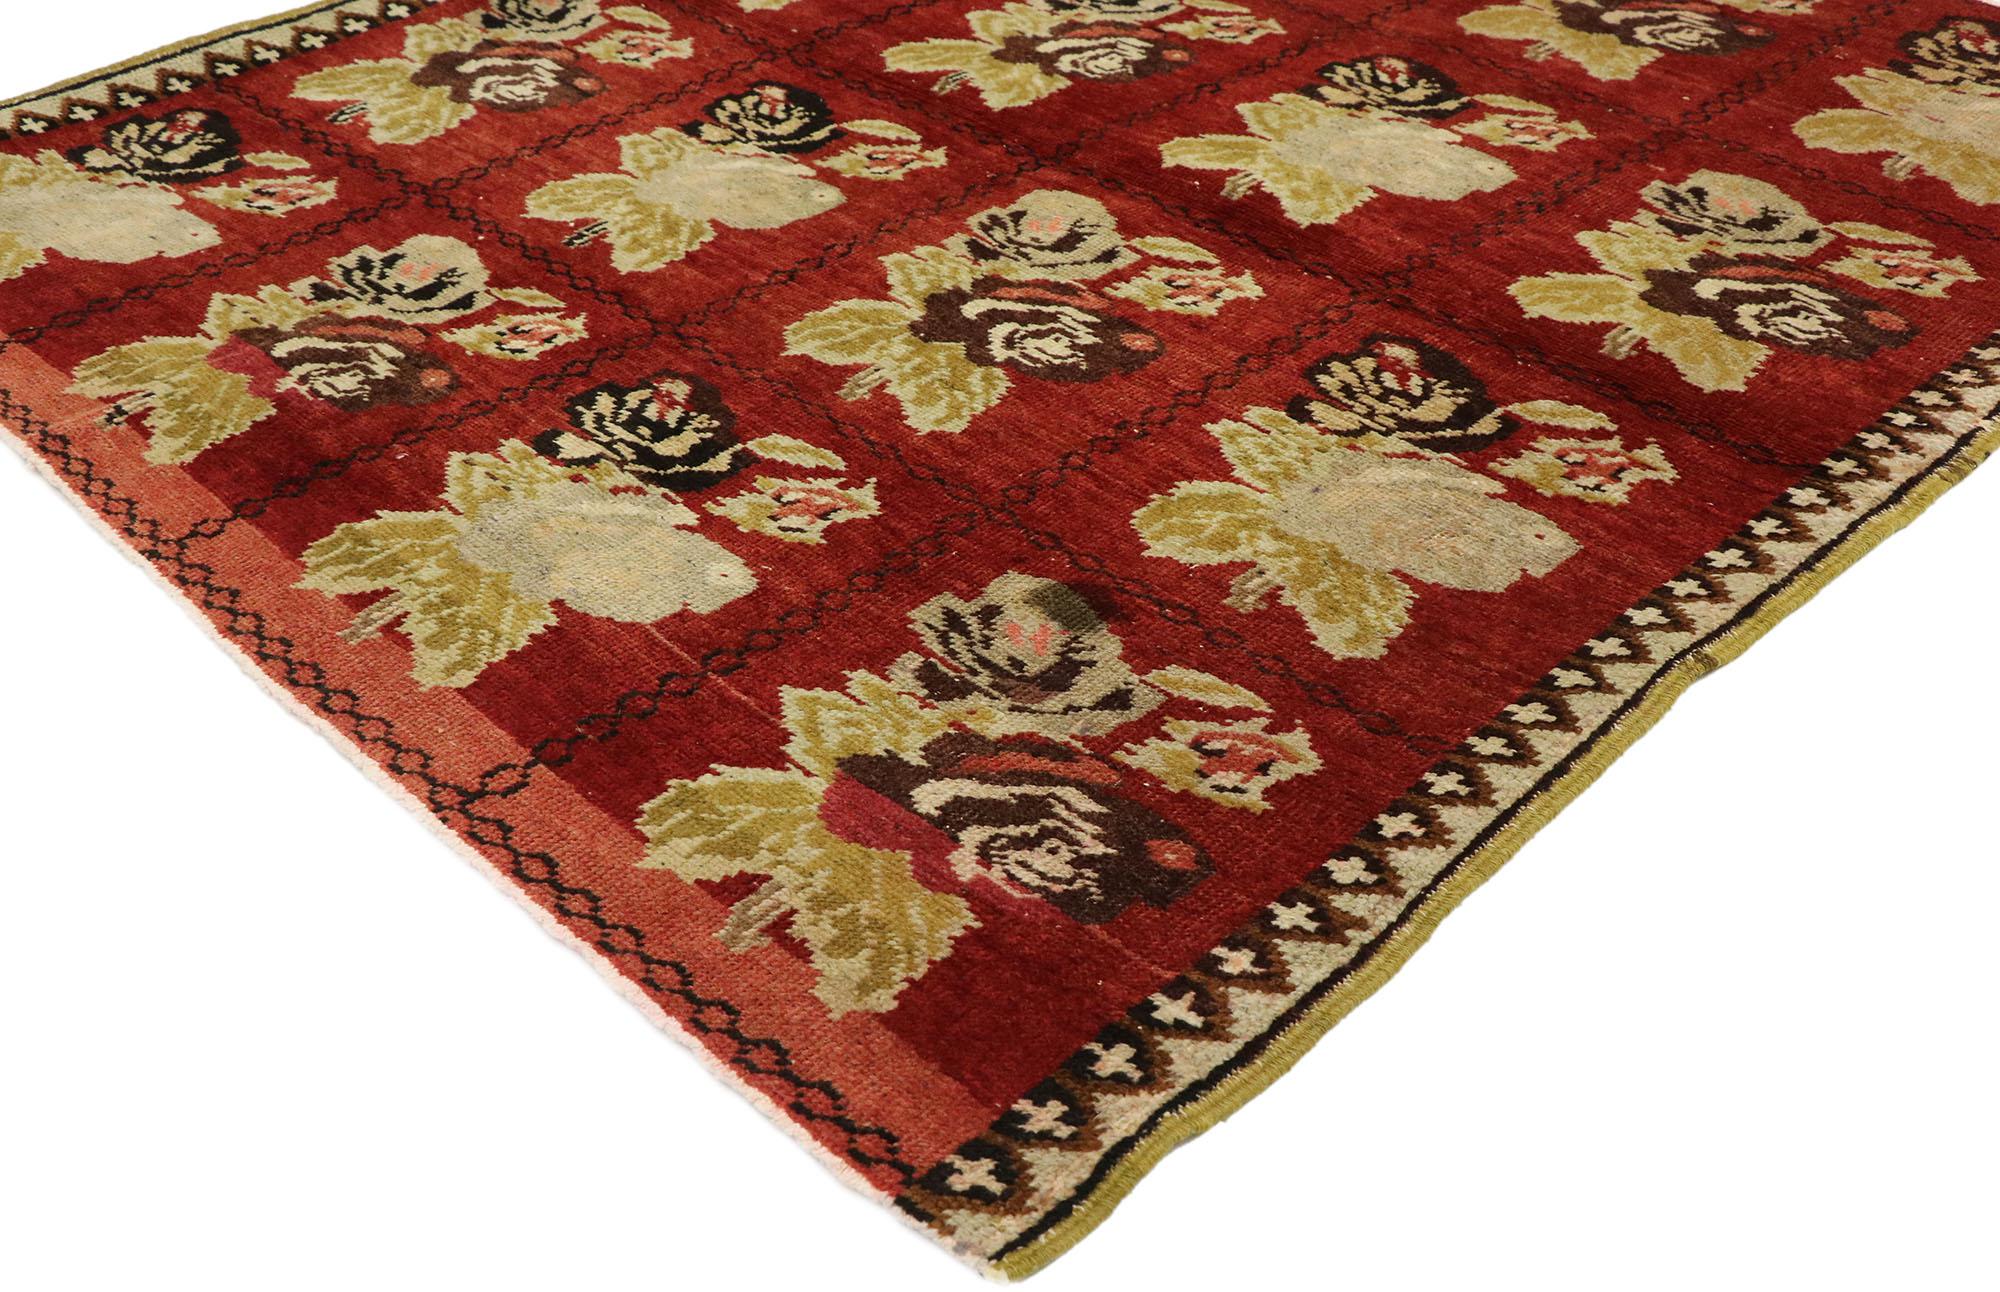 51569 Vintage Red Turkish Oushak Rug, 03’05 x 03’11. Step into a world where every step is a dance amidst a garden of exquisite blooms, where the air is filled with the heady scent of cabbage roses and the warmth of deep ruby hues envelops you like